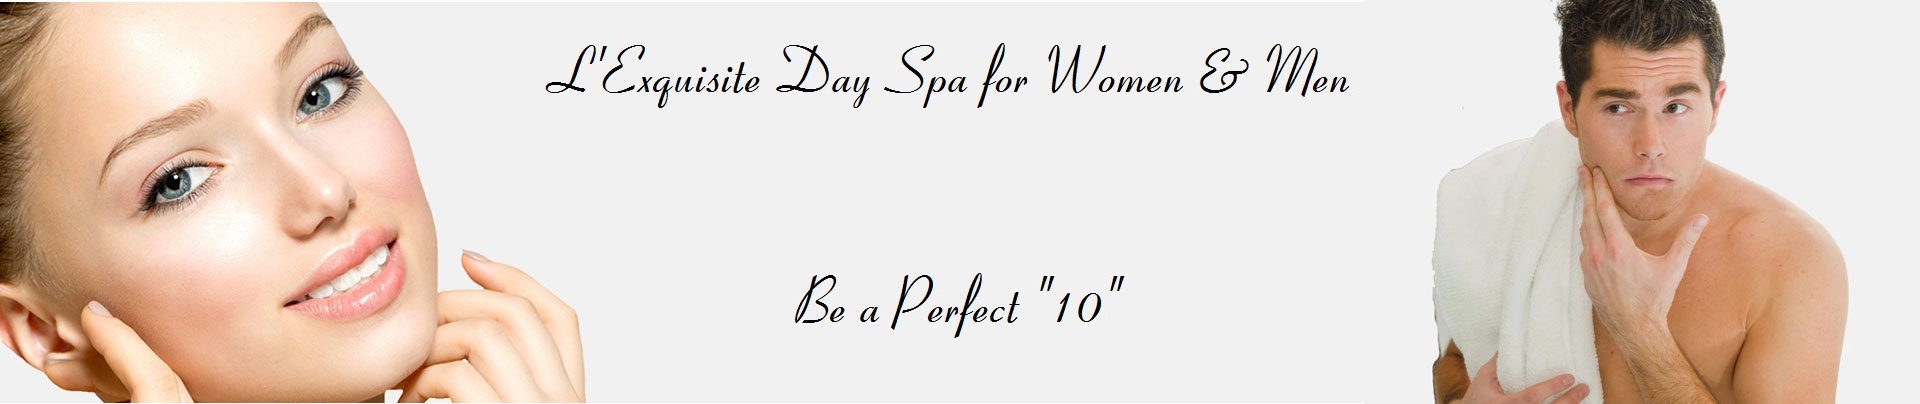 L'Exquisite Day Spa For Women & Men